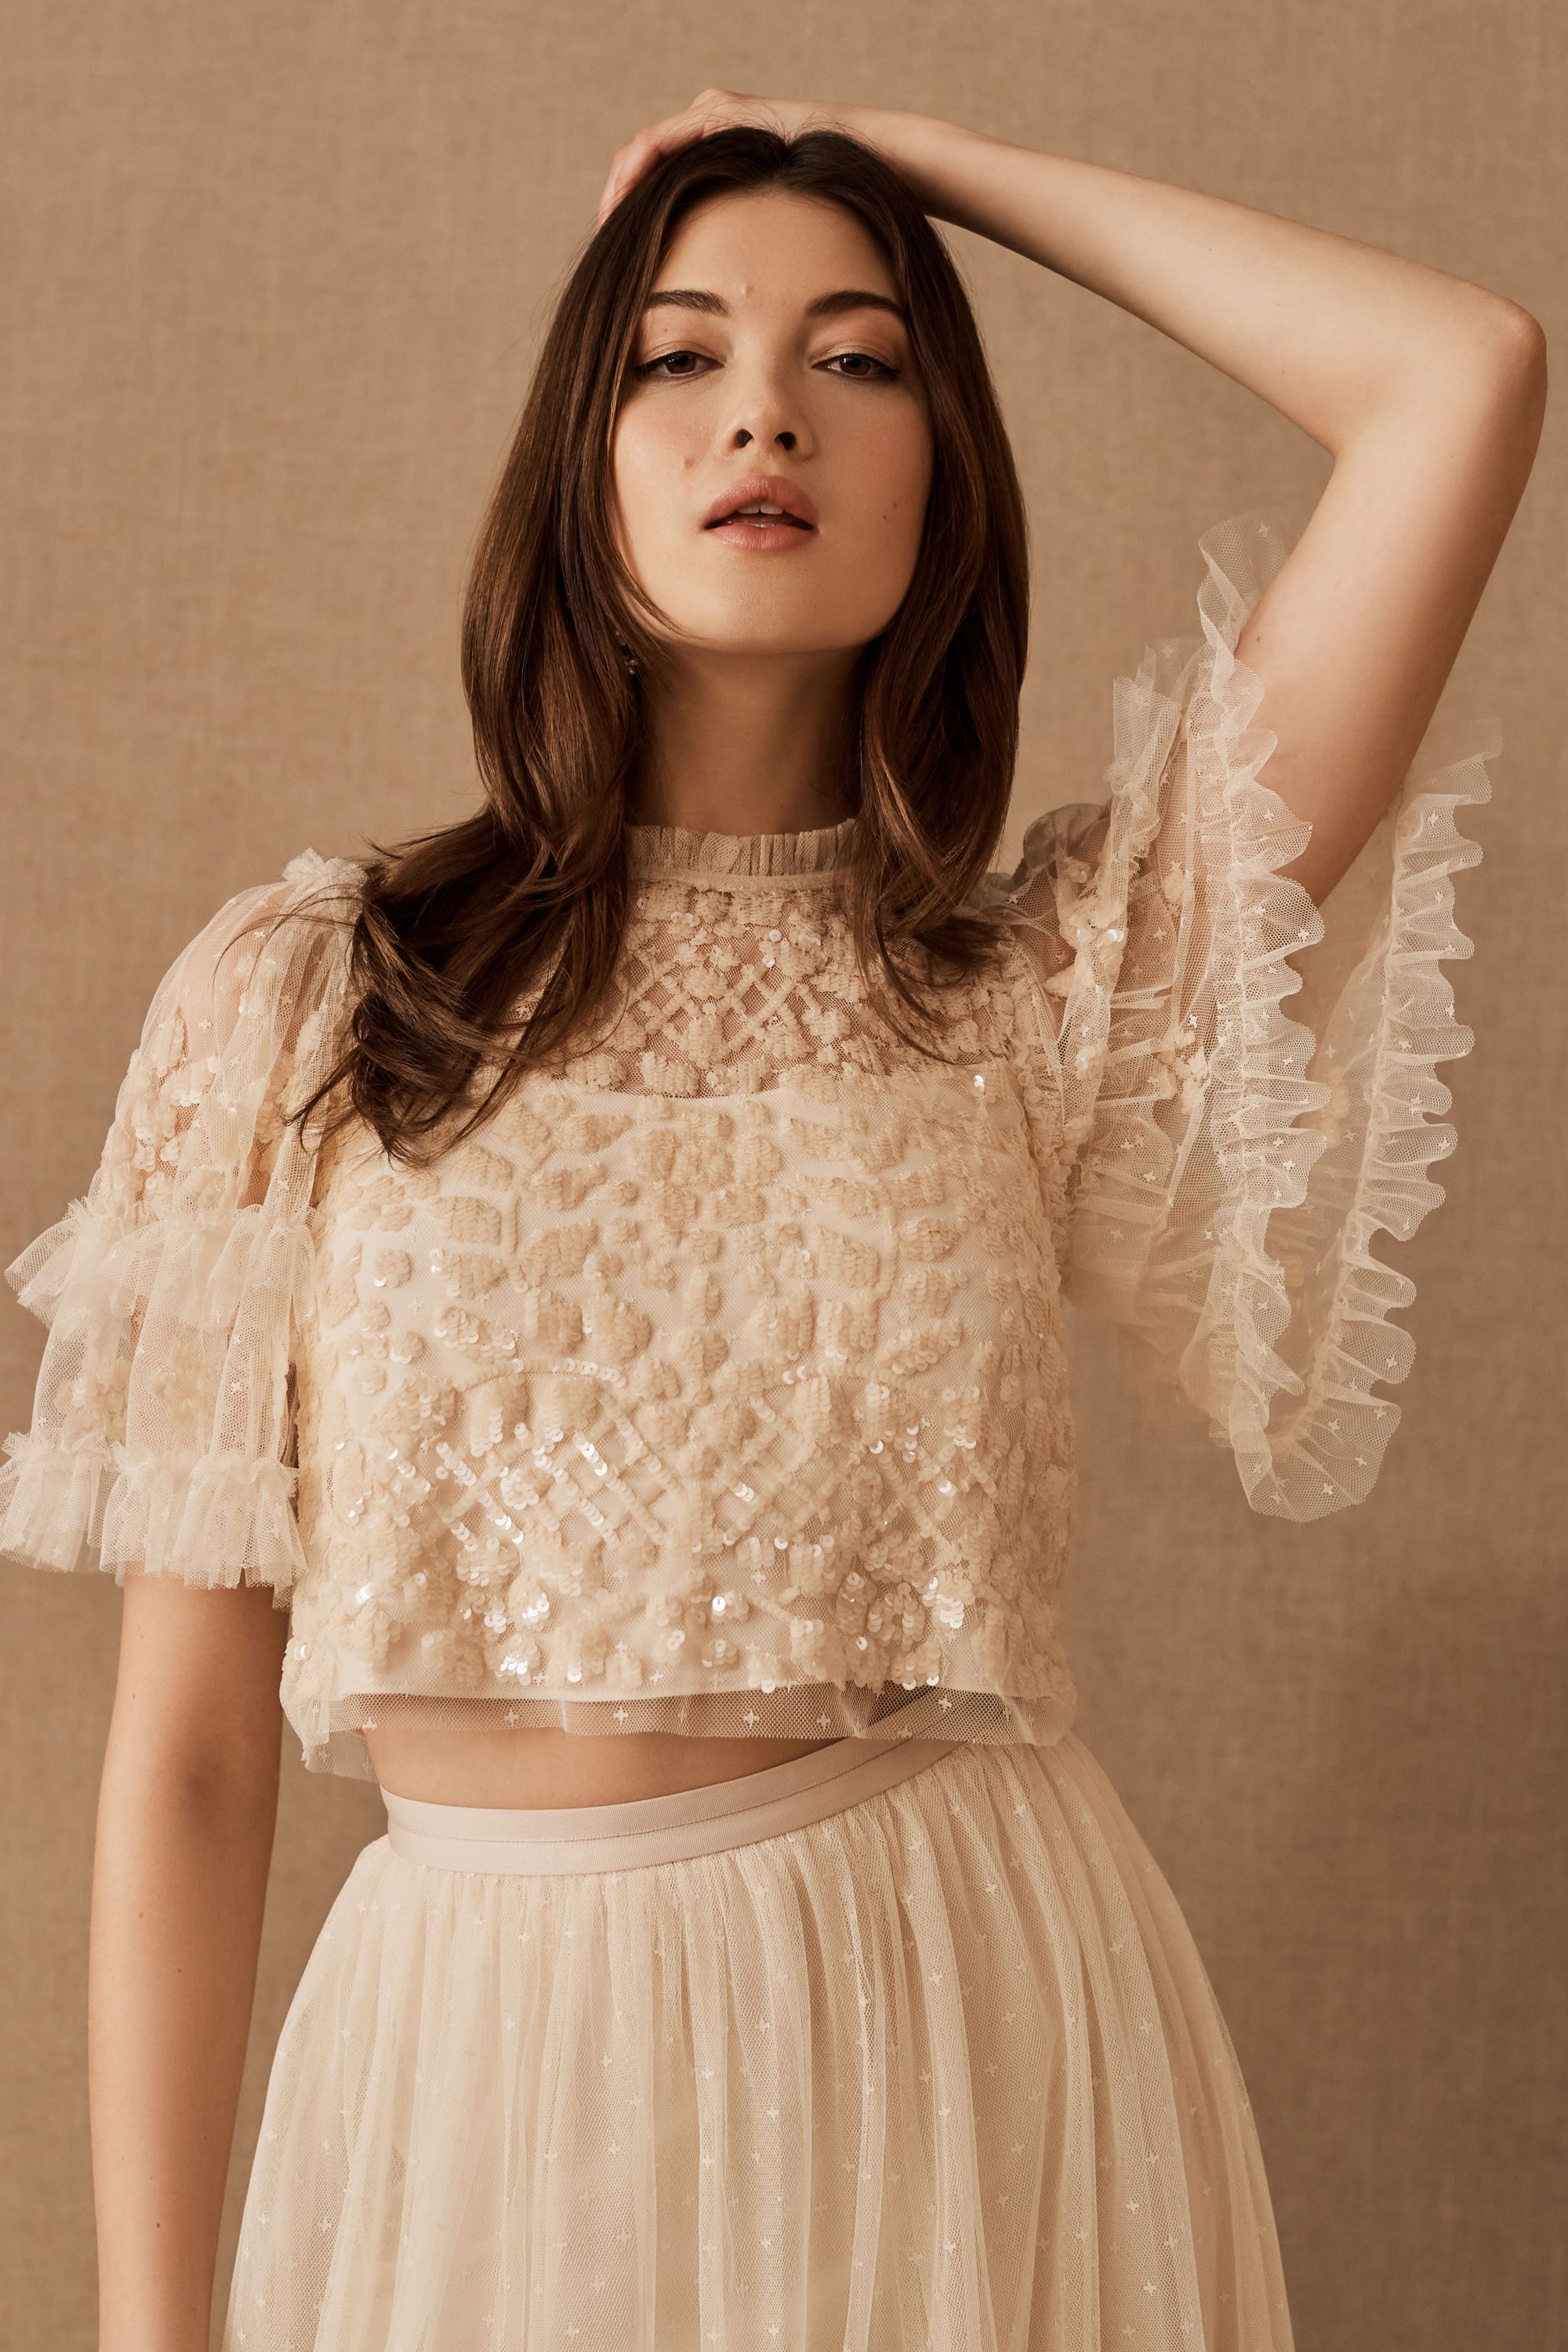 bhldn lace top